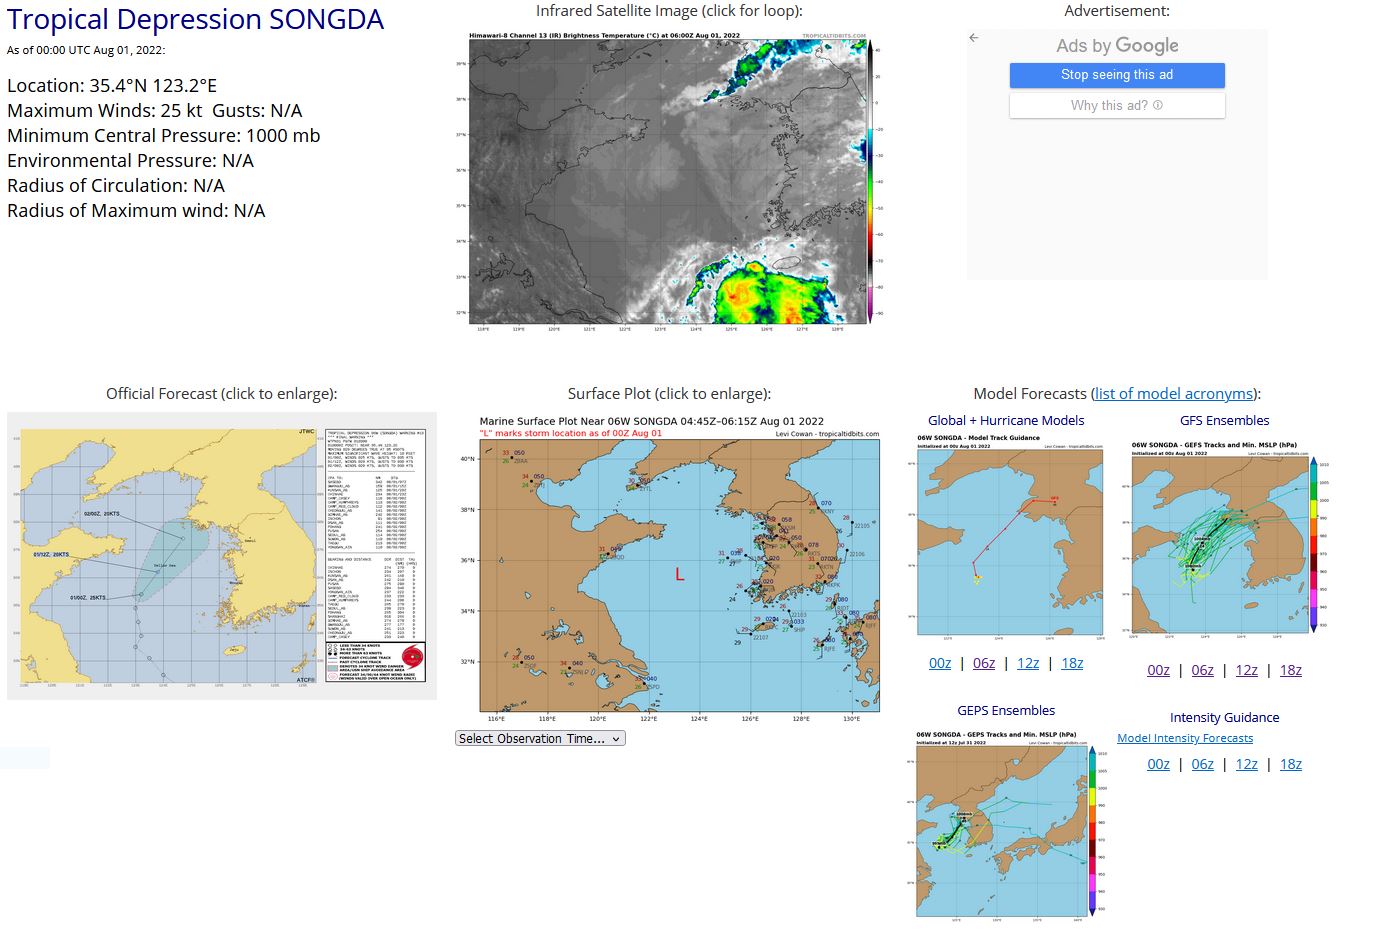 REMARKS: 010300Z POSITION NEAR 35.6N 123.4E. 01AUG22. TROPICAL DEPRESSION (TD) 06W (SONGDA), LOCATED APPROXIMATELY 168 NM WEST OF KUNSAN AB, HAS TRACKED NORTH-NORTHEASTWARD AT 05 KNOTS OVER THE PAST SIX HOURS. ANIMATED MULTISPECTRAL SATELLITE  IMAGERY DEPICTS A FULLY-EXPOSED, DEFINED LOW-LEVEL CIRCULATION (LLC)  WITH NO ASSOCIATED DEEP CONVECTION. THEREFORE THERE IS HIGH  CONFIDENCE IN THE INITIAL POSITION. A 312306Z SSMIS 91GHZ COLOR  COMPOSITE MICROWAVE IMAGE SHOWS SHALLOW BANDING WRAPPING AROUND A  BROAD, WEAKENING CENTER. THE INITIAL INTENSITY IS ASSESSED AT 25  KNOTS WITH MEDIUM CONFIDENCE. TD 06W IS LOCATED UNDER STRONG SOUTHWESTERLY FLOW ALOFT ASSOCIATED WITH AN UPPER-LEVEL TROUGH POSITIONED OVER THE GULF OF POHAI. THIS UNFAVORABLE ENVIRONMENT IS DOMINATED BY CONVERGENCE ALOFT, MODERATE TO HIGH VERTICAL WIND SHEAR AND SIGNIFICANT DRY AIR. THESE CONDITIONS WILL  PERSIST THROUGH THE FORECAST PERIOD WITH STEADY WEAKENING EXPECTED  AND DISSIPATION LIKELY BY TAU 12. THERE IS SOME UNCERTAINTY IN THE  EXACT FORECAST TRACK WITH TD 07W LOCATED ABOUT 250NM SOUTHEAST OF TD  06W'S INITIAL POSITION. THUS BINARY INTERACTION COULD OCCUR AS TD 07W  GETS ABSORBED IN THE SOUTHEASTERN PERIPHERY OF TD 06W. THIS IS THE  FINAL WARNING ON THIS SYSTEM BY THE JOINT TYPHOON WRNCEN PEARL HARBOR  HI. THE SYSTEM WILL BE CLOSELY MONITORED FOR SIGNS OF REGENERATION.  MAXIMUM SIGNIFICANT WAVE HEIGHT AT 010000Z IS 10 FEET.